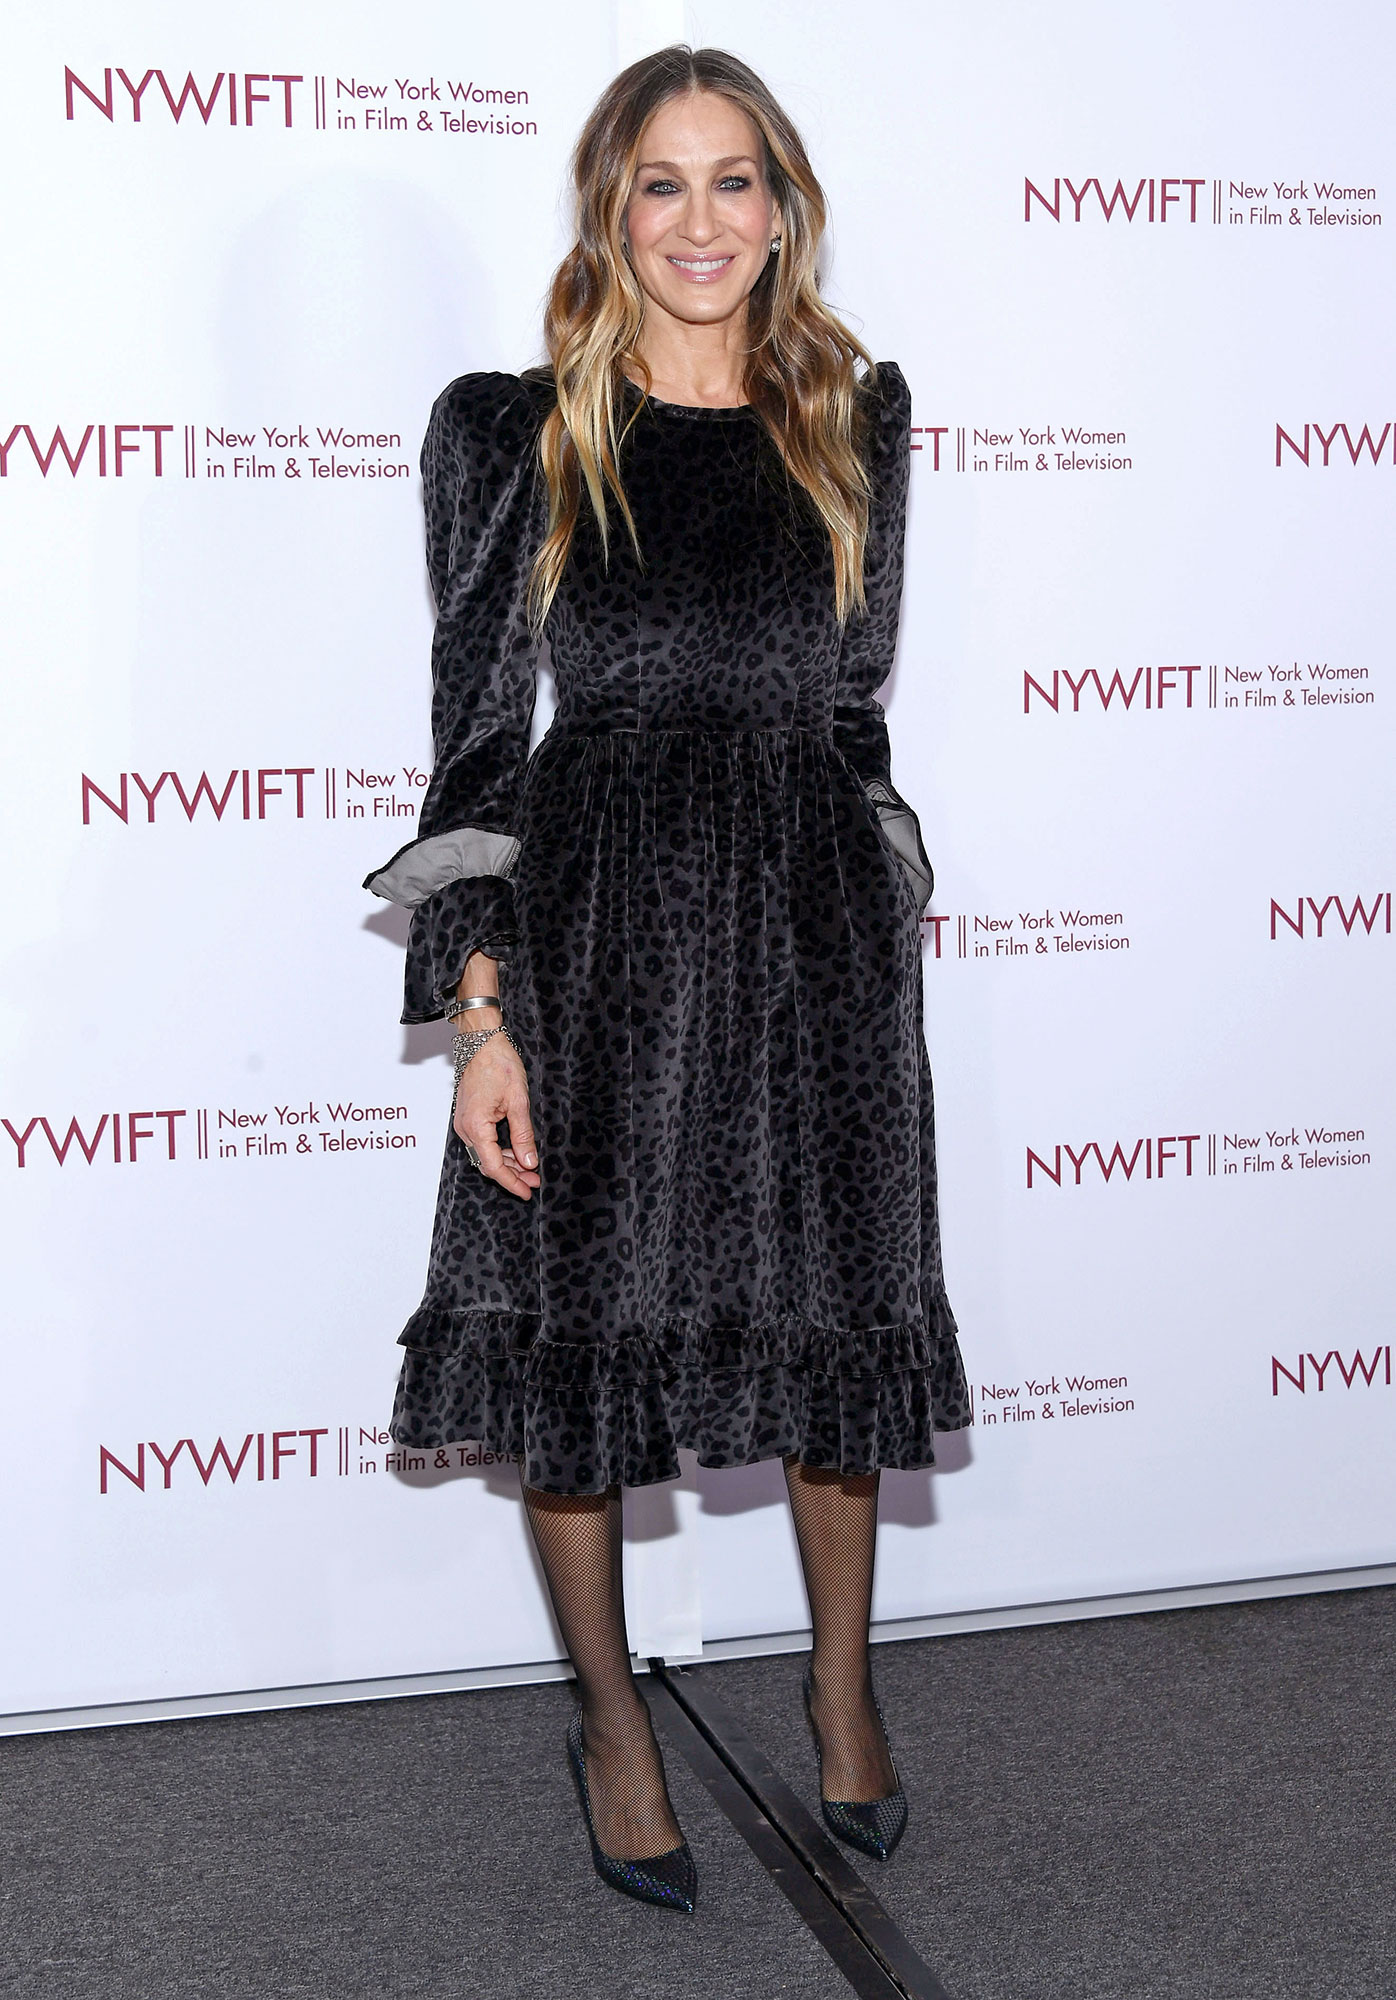 Sarah Jessica Parker Celebrities Who Went From Rags to Riches